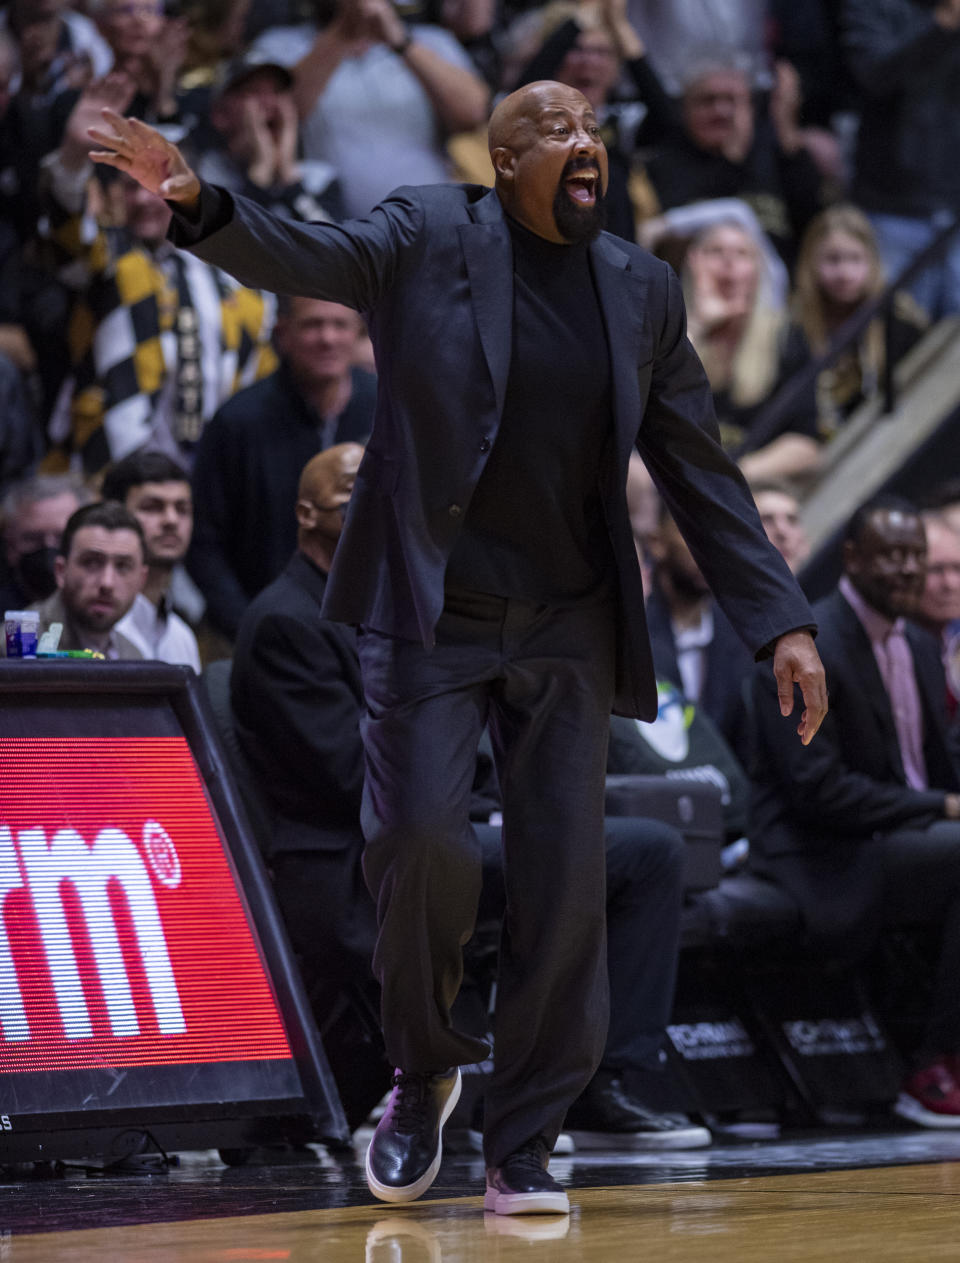 Indiana head coach Mike Woodson reacts to action on the court during the first half of an NCAA college basketball game against Purdue, Saturday, March 5, 2022, in West Lafayette, Ind. (AP Photo/Doug McSchooler)